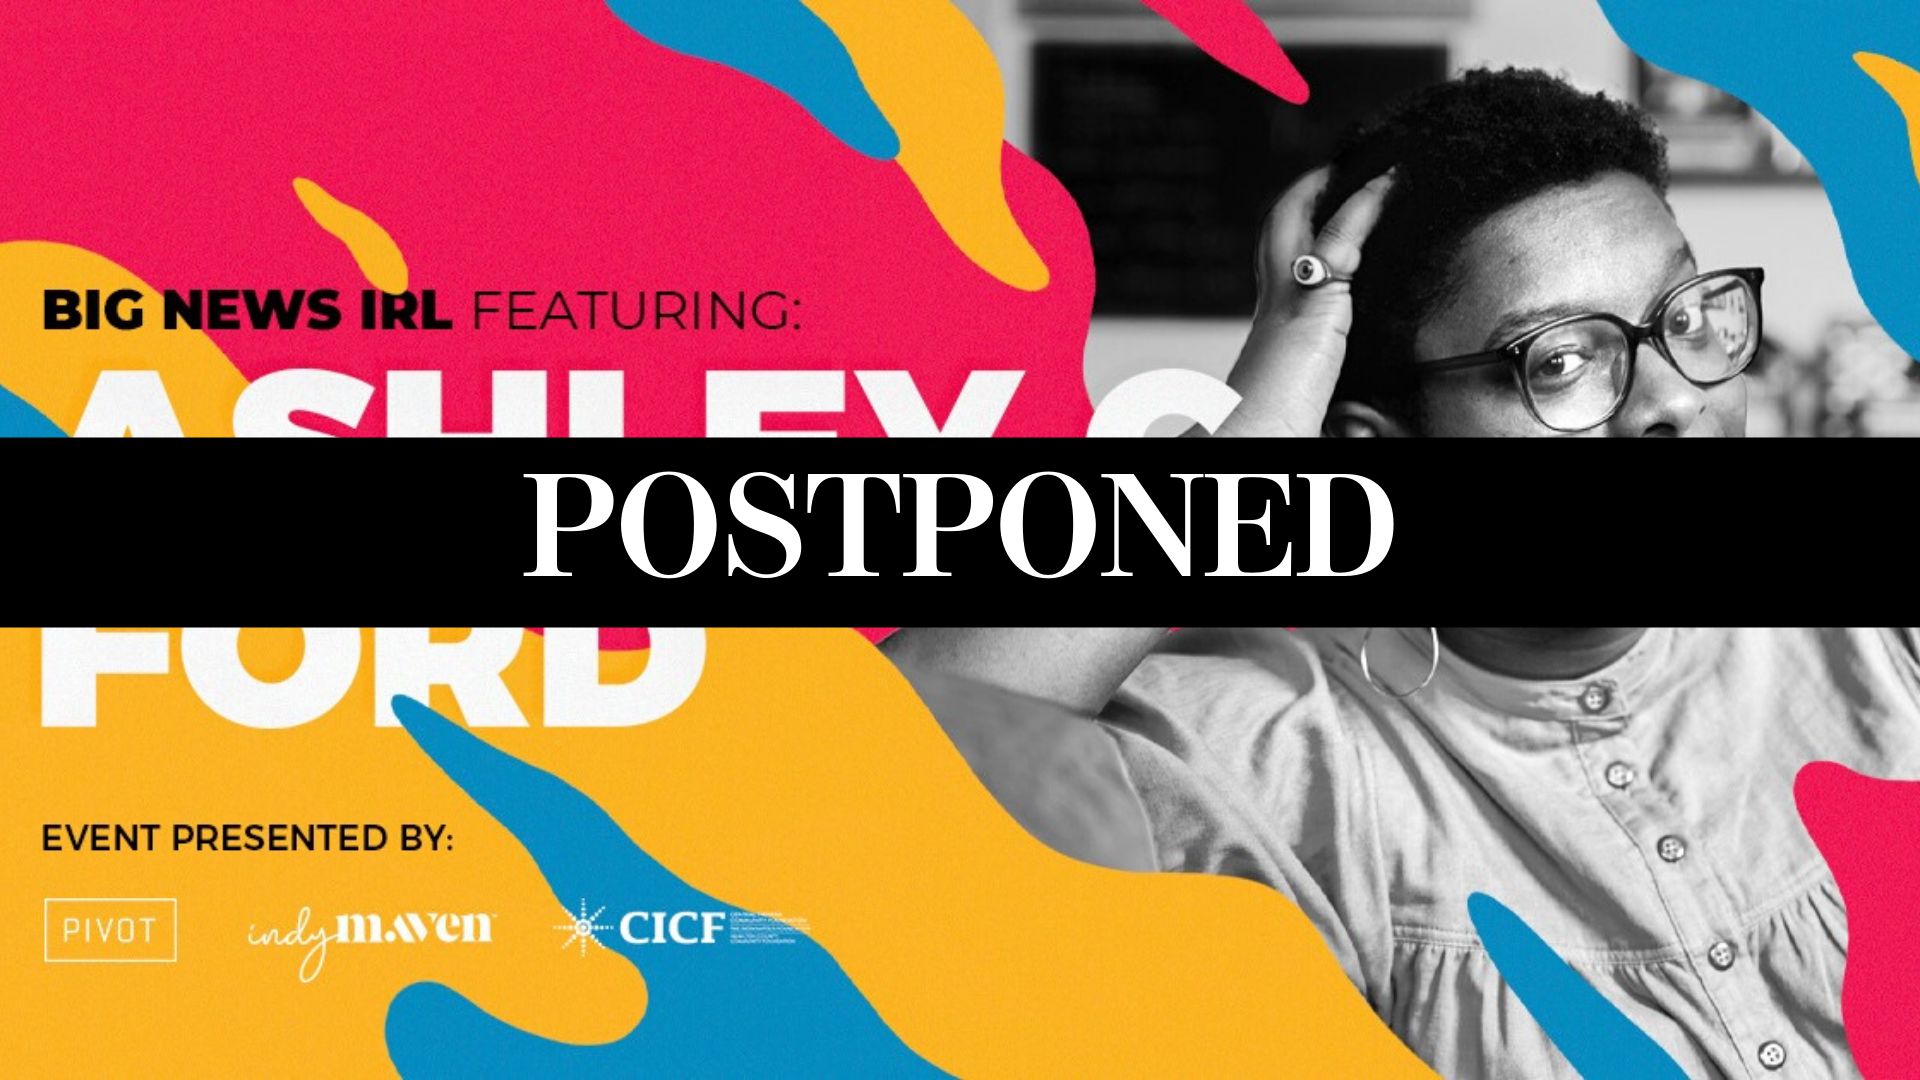 POSTPONED: BIG NEWS IRL WITH ASHLEY C. FORD